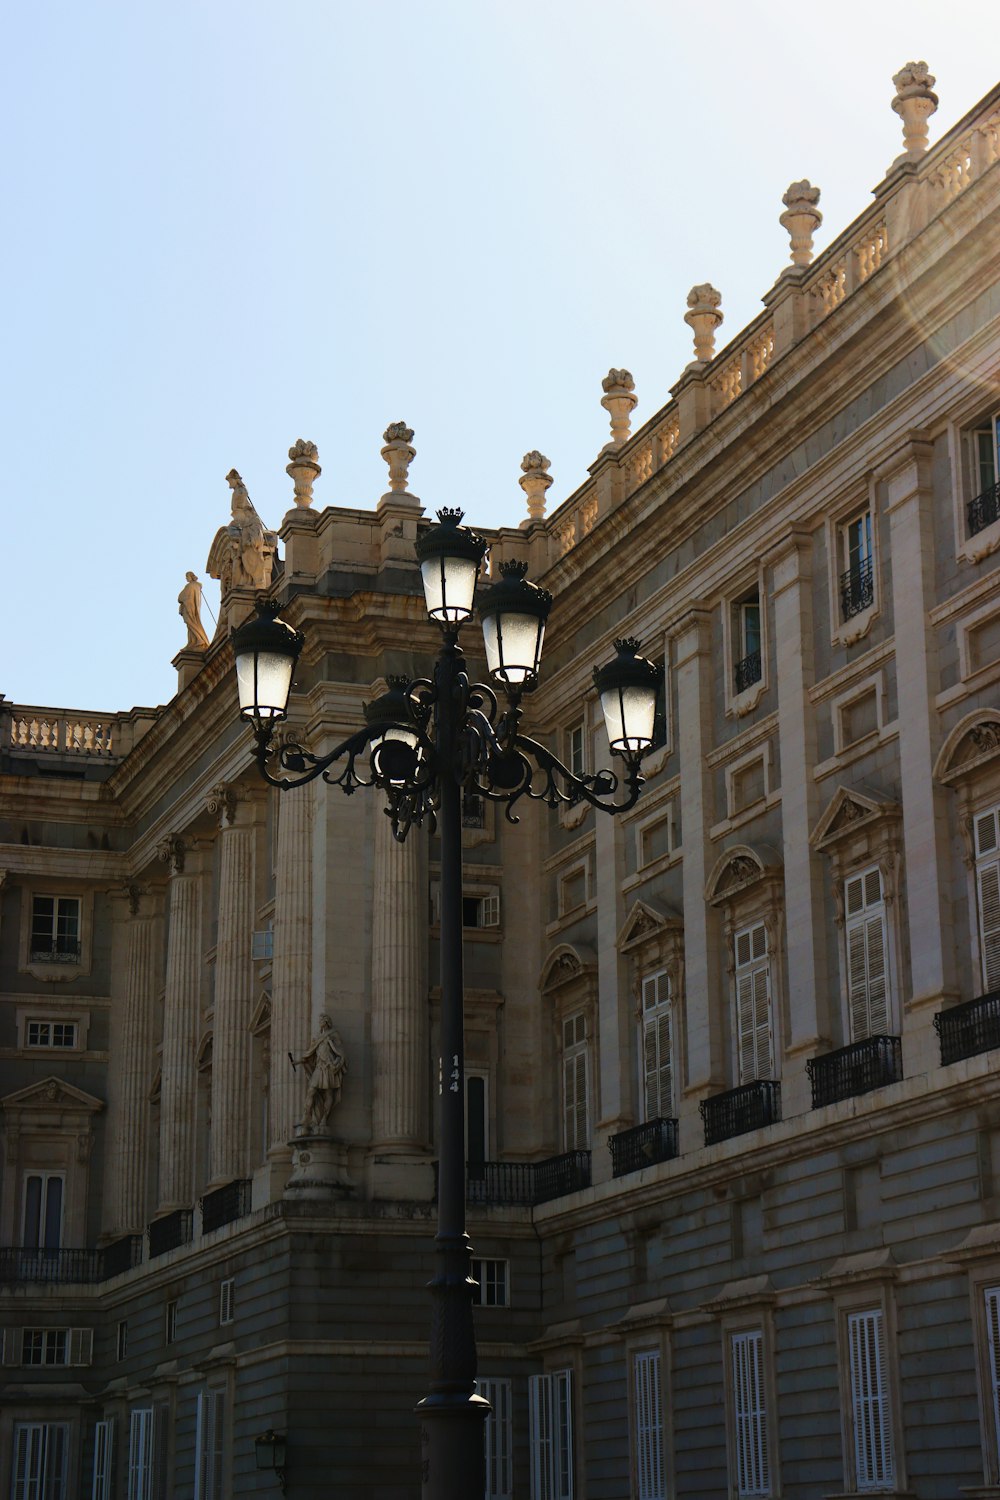 a lamp post in front of a large building